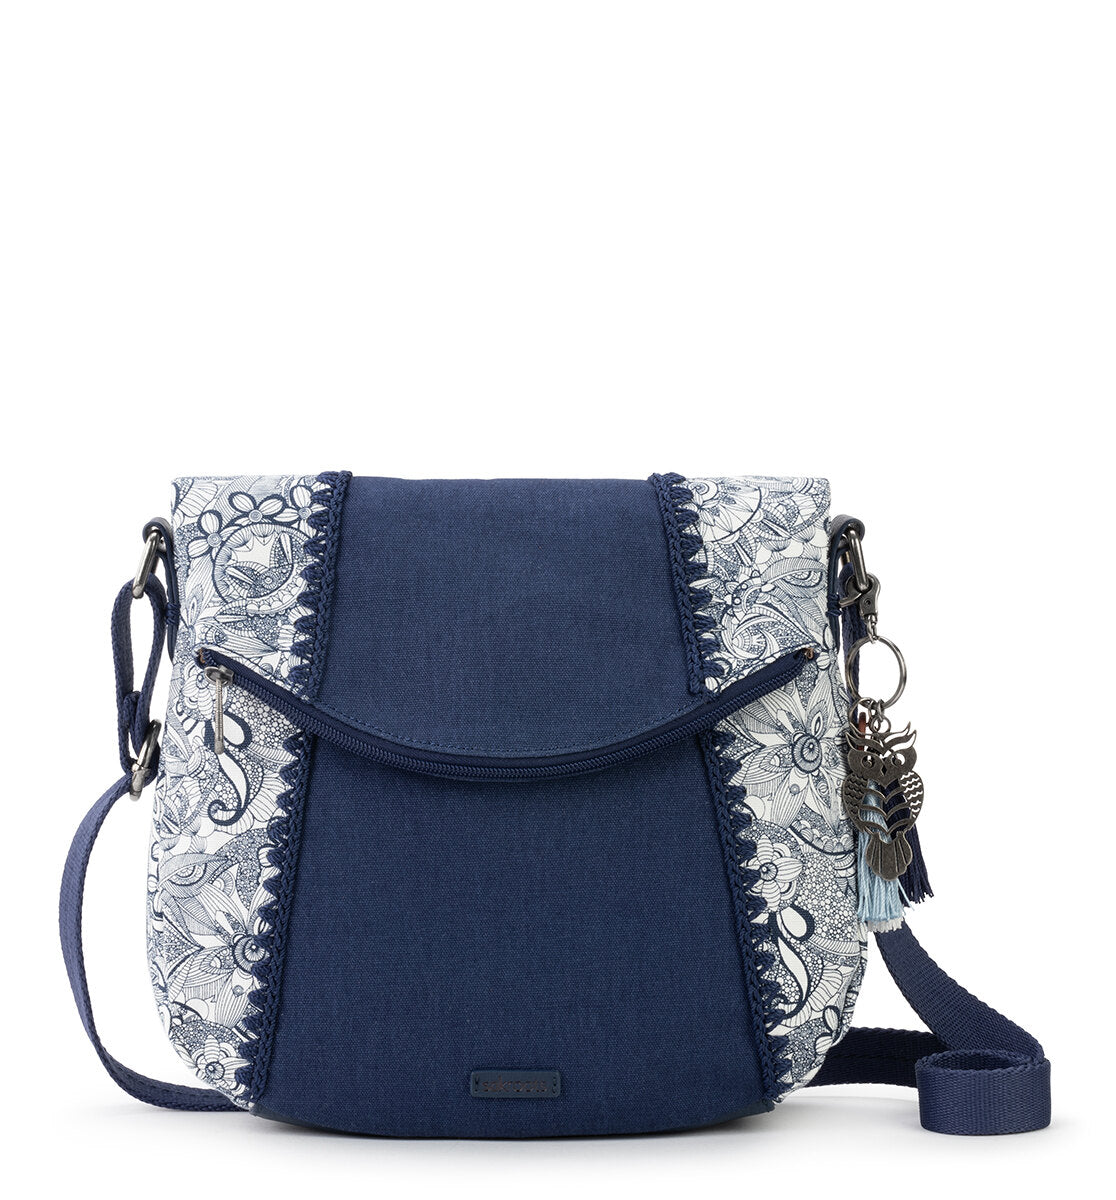 The Foldover Crossbody and Large Smartphone Gift Set